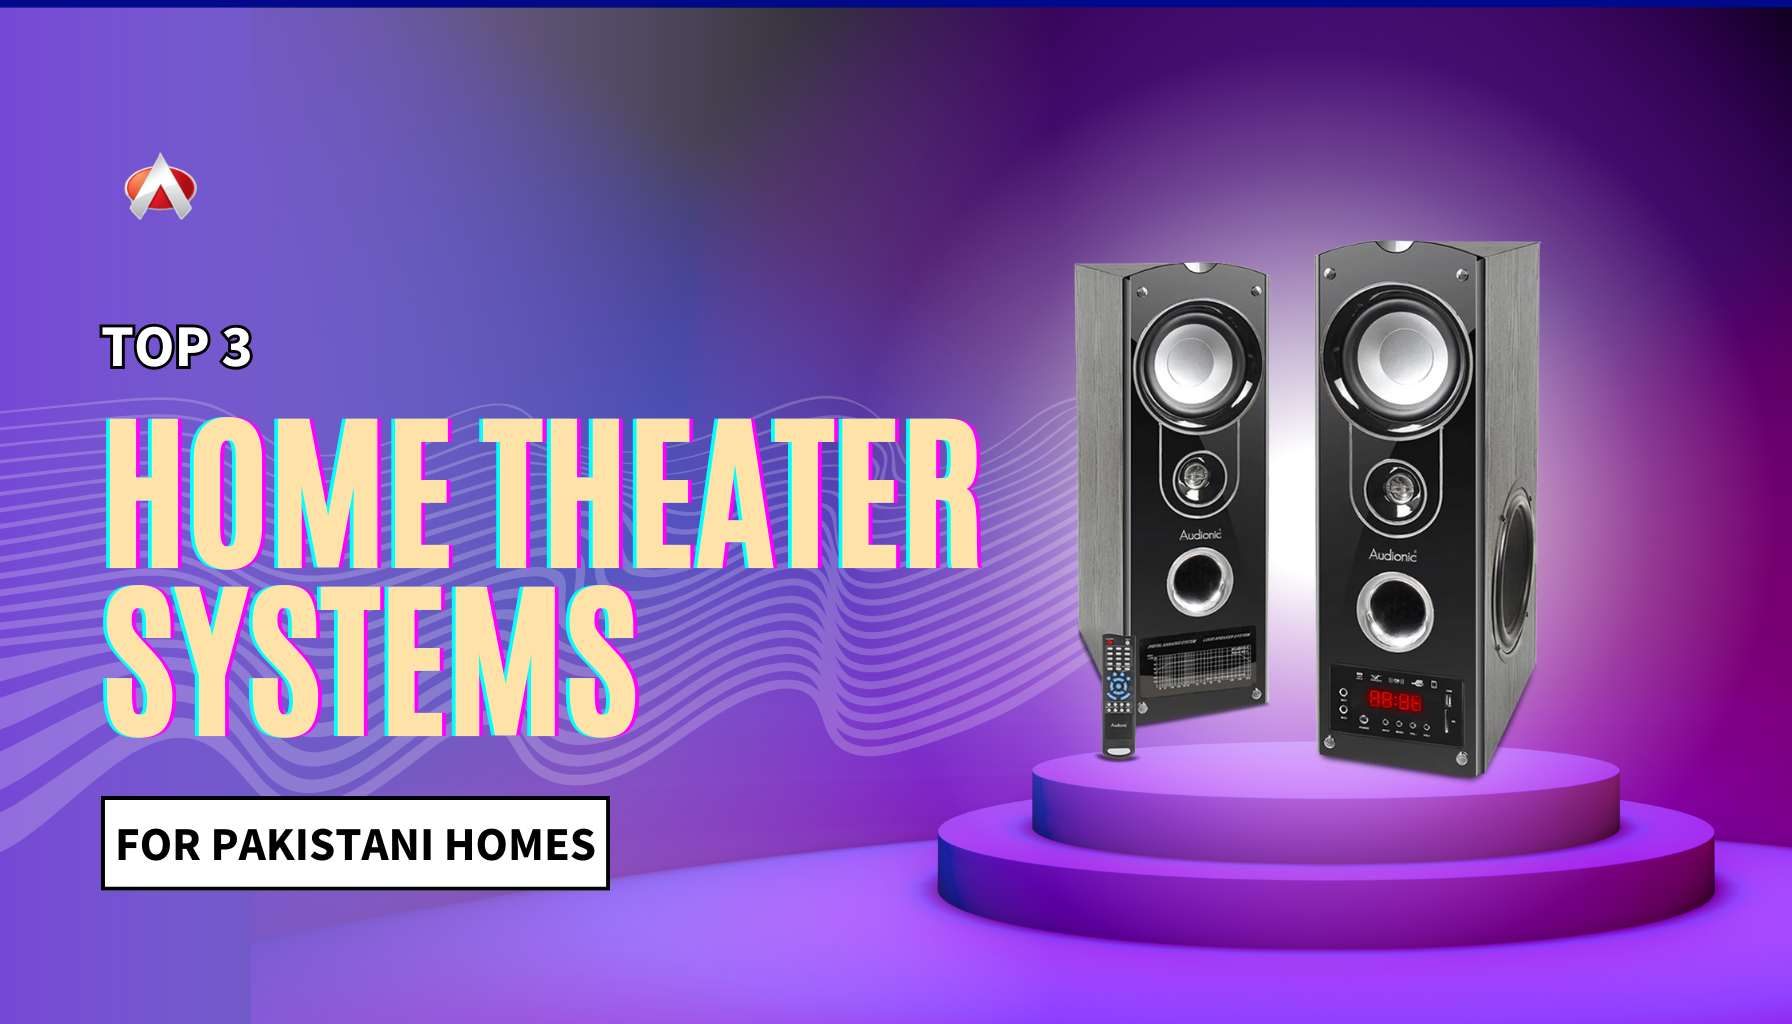 Top 3 Home Theater Systems for Pakistani Homes